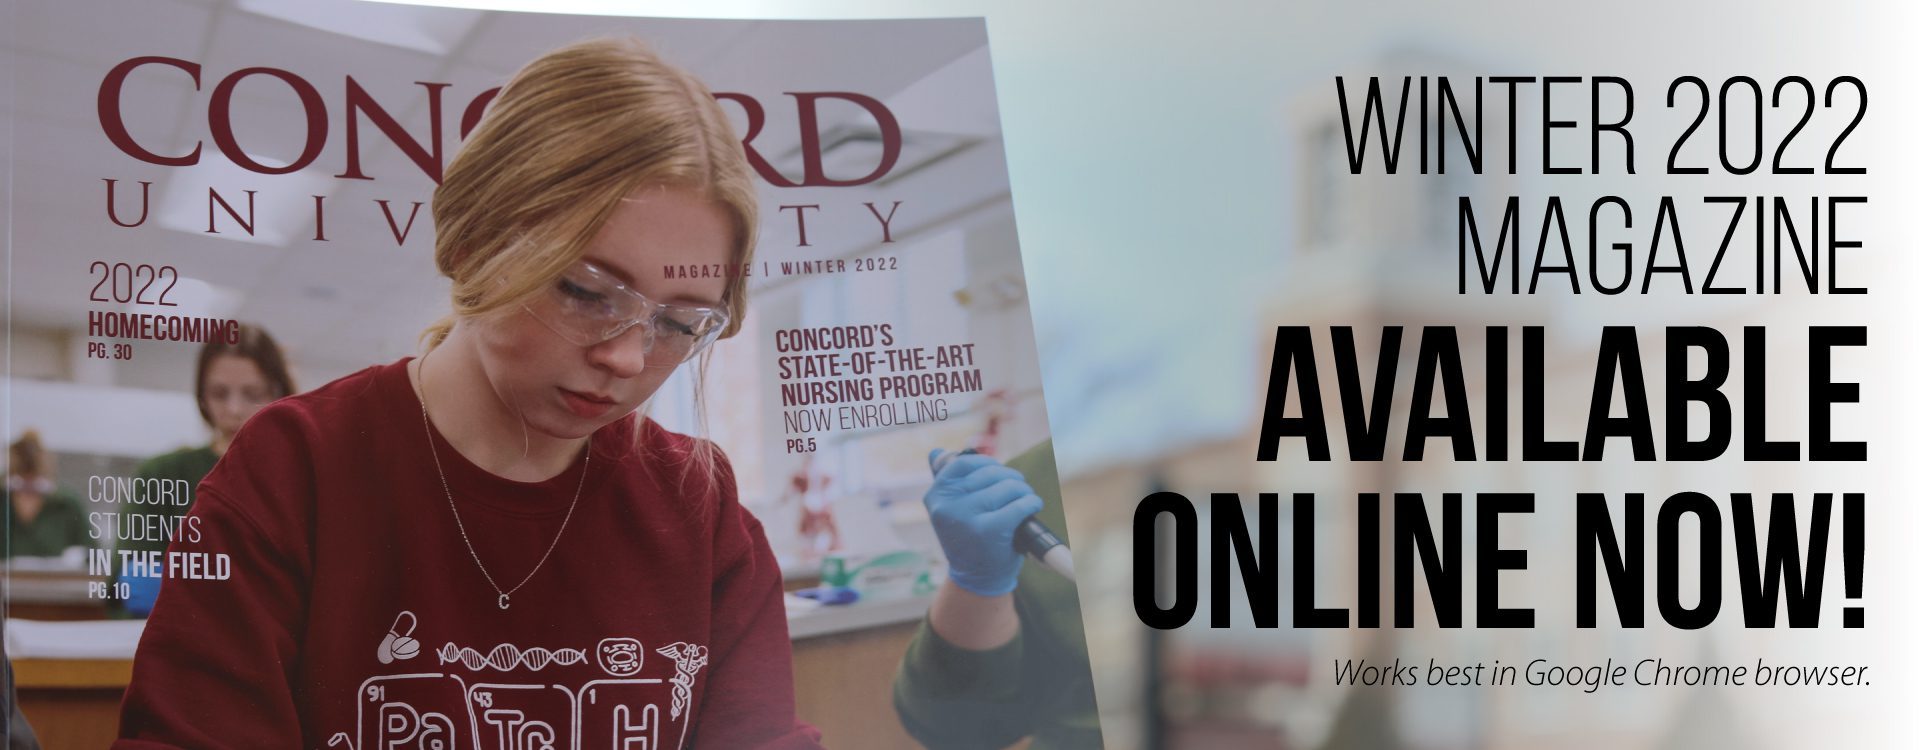 Concord University's Winter 2022 Magazine is available online now! It works best with the Google Chrome browser